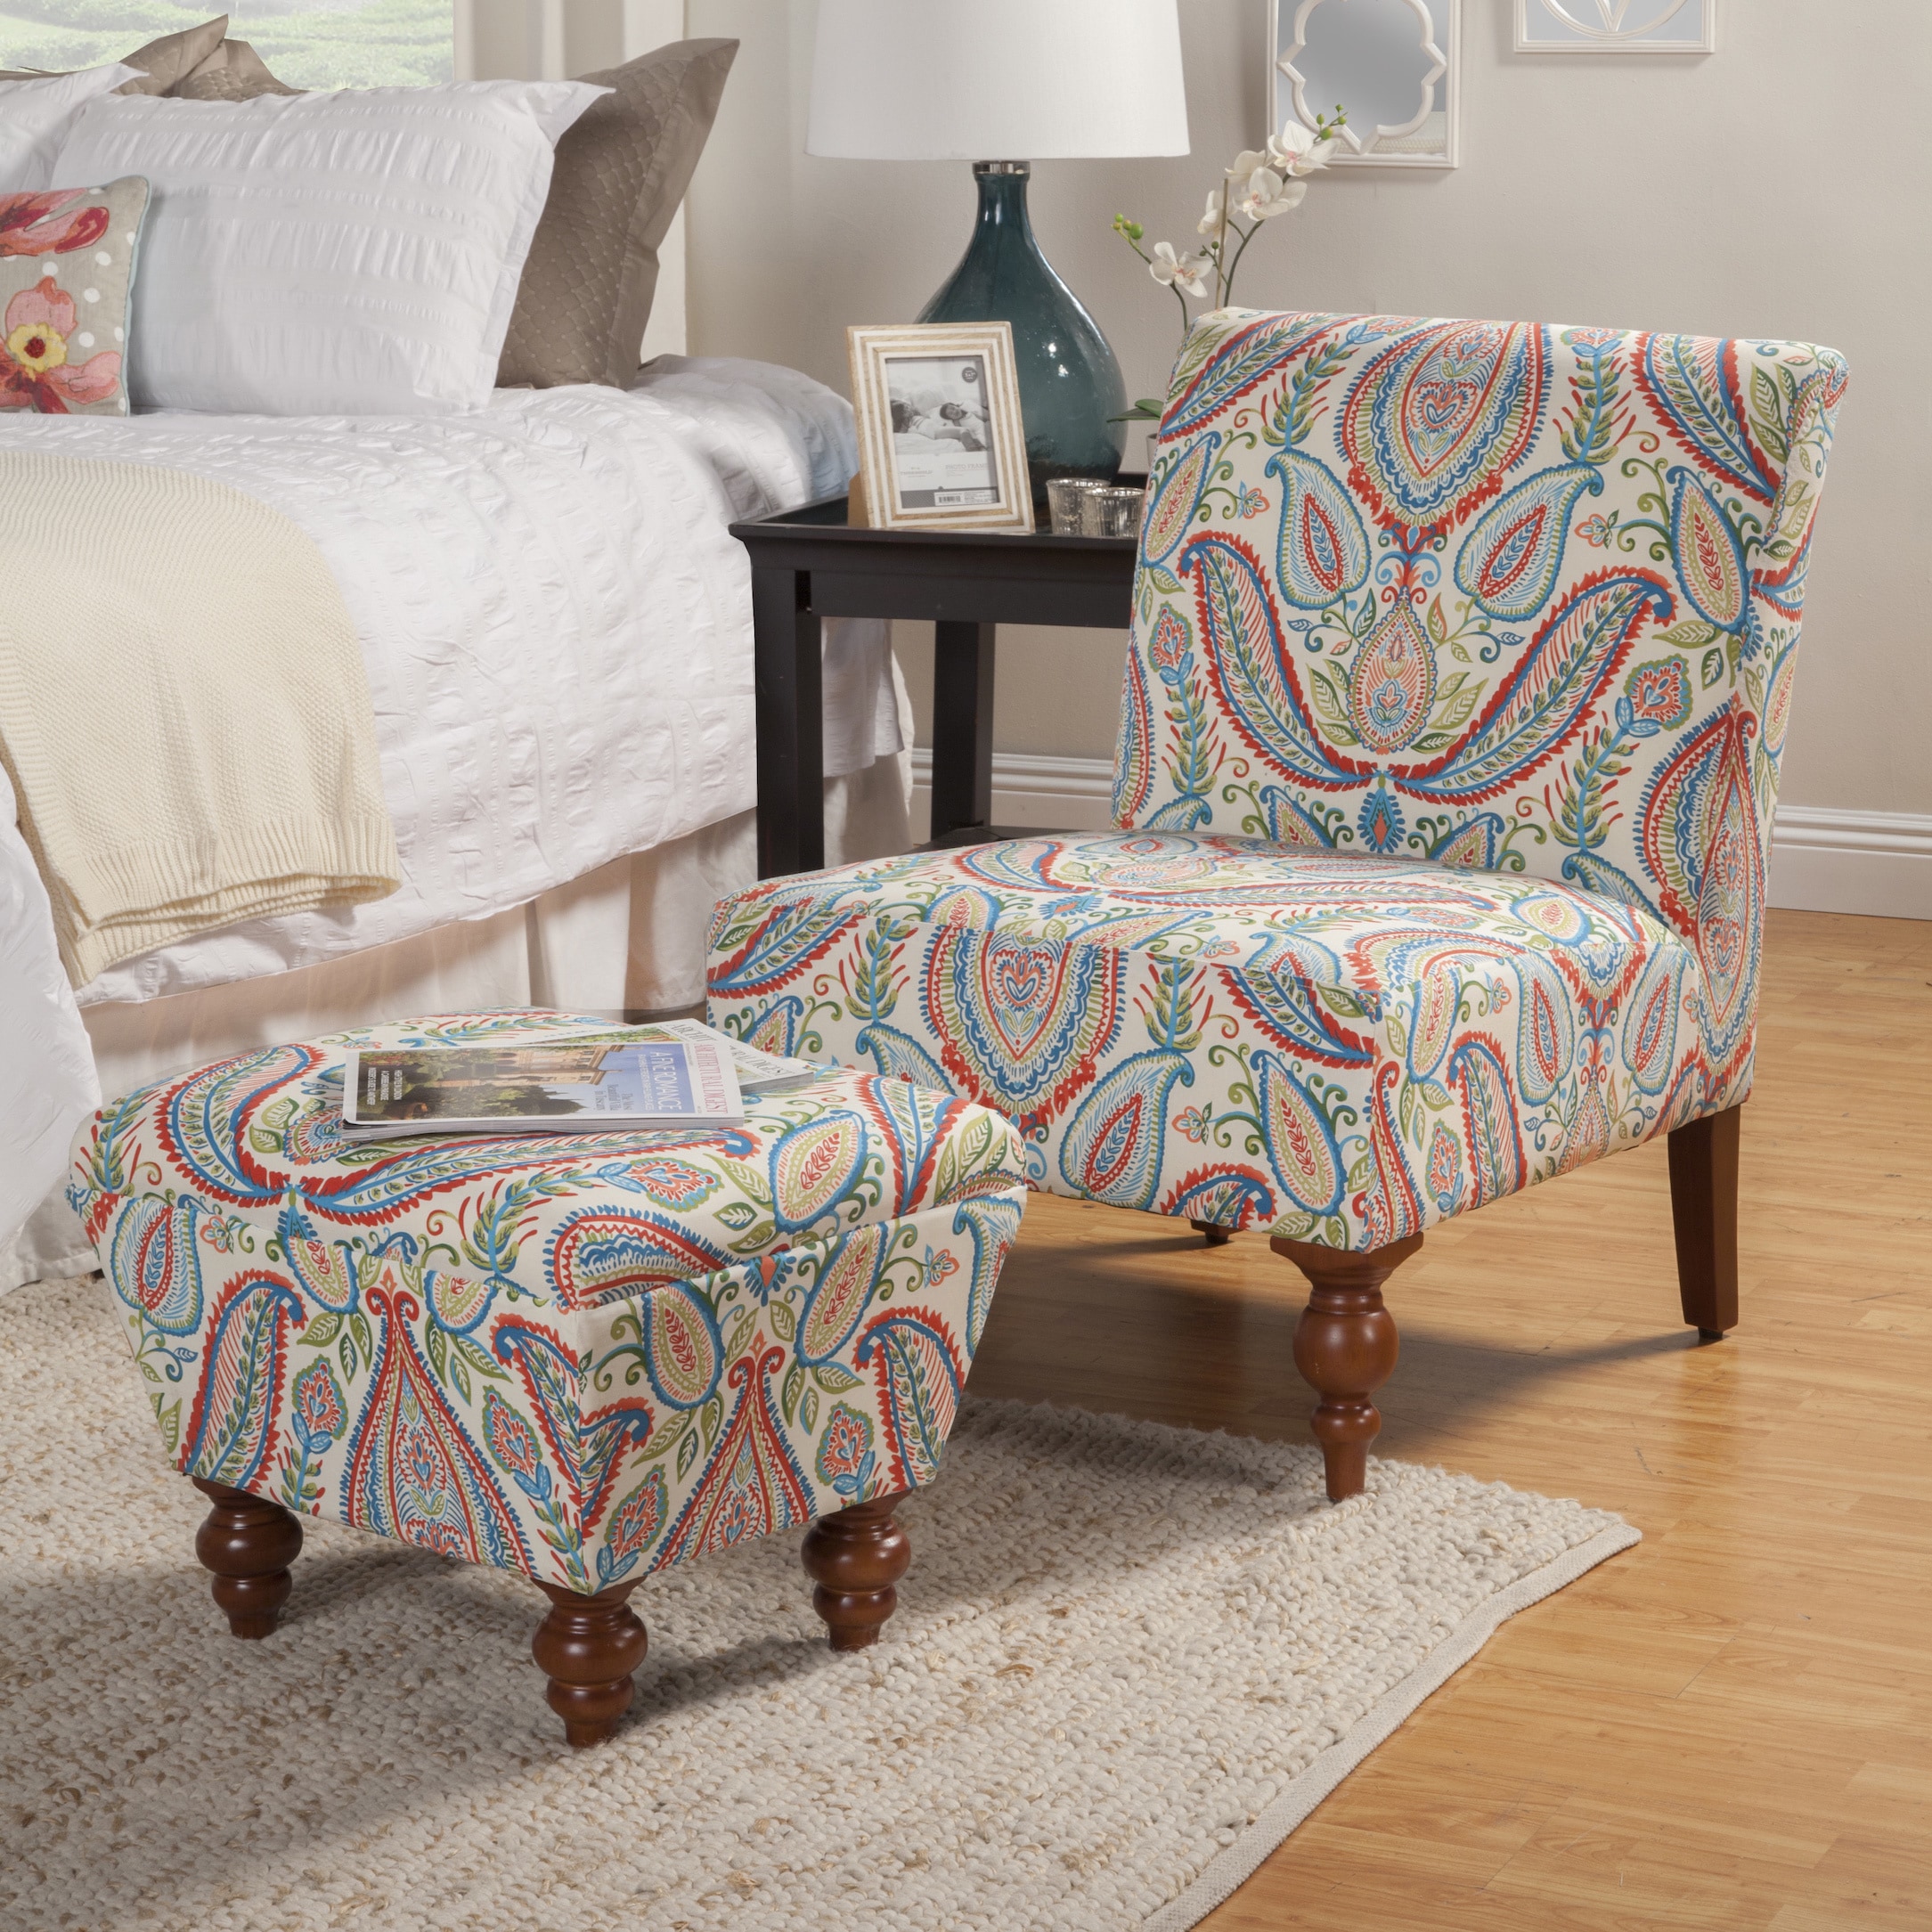 HomePop Coral and Turquoise Paisley Accent Chair and Ottoman Multi | eBay